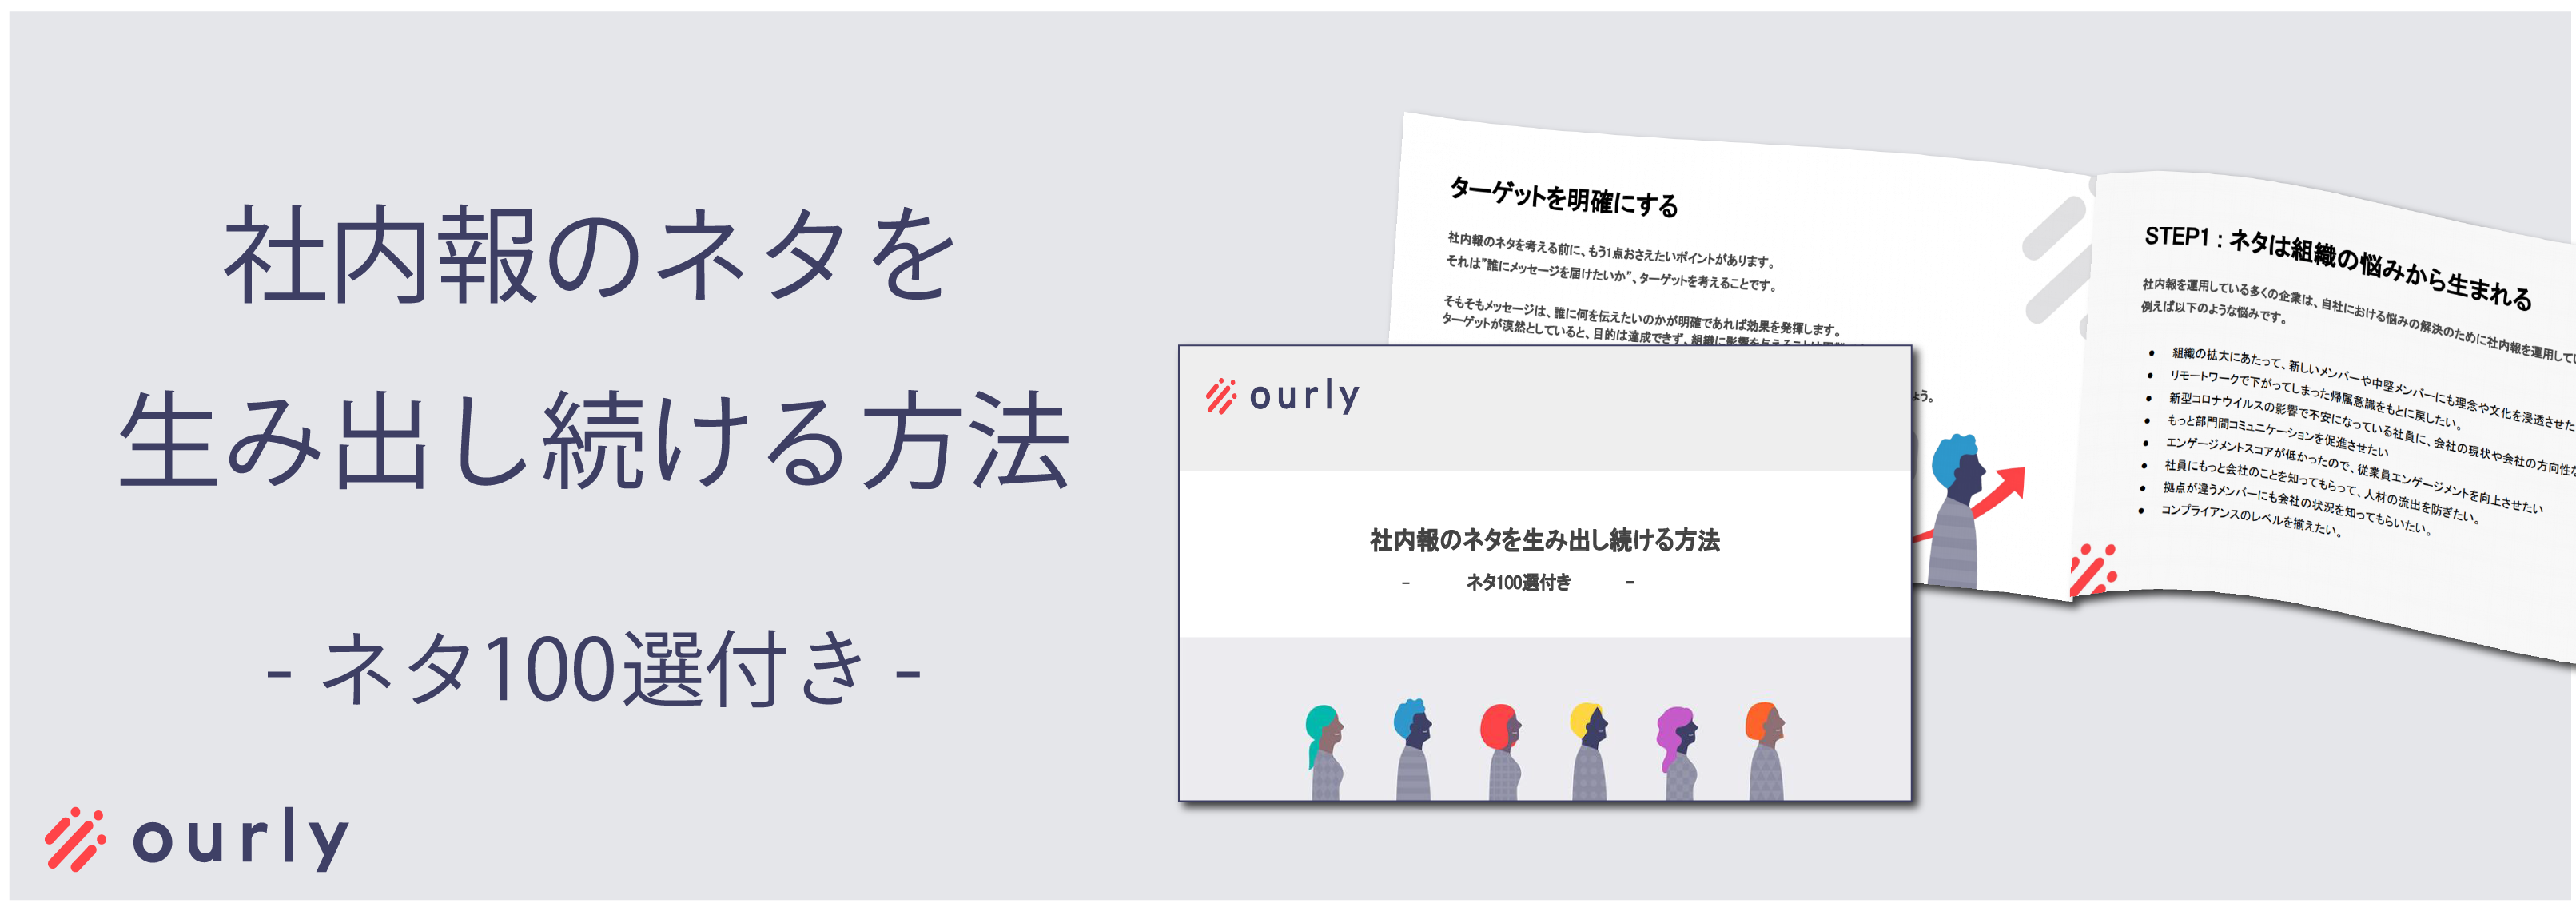 ourly紹介資料